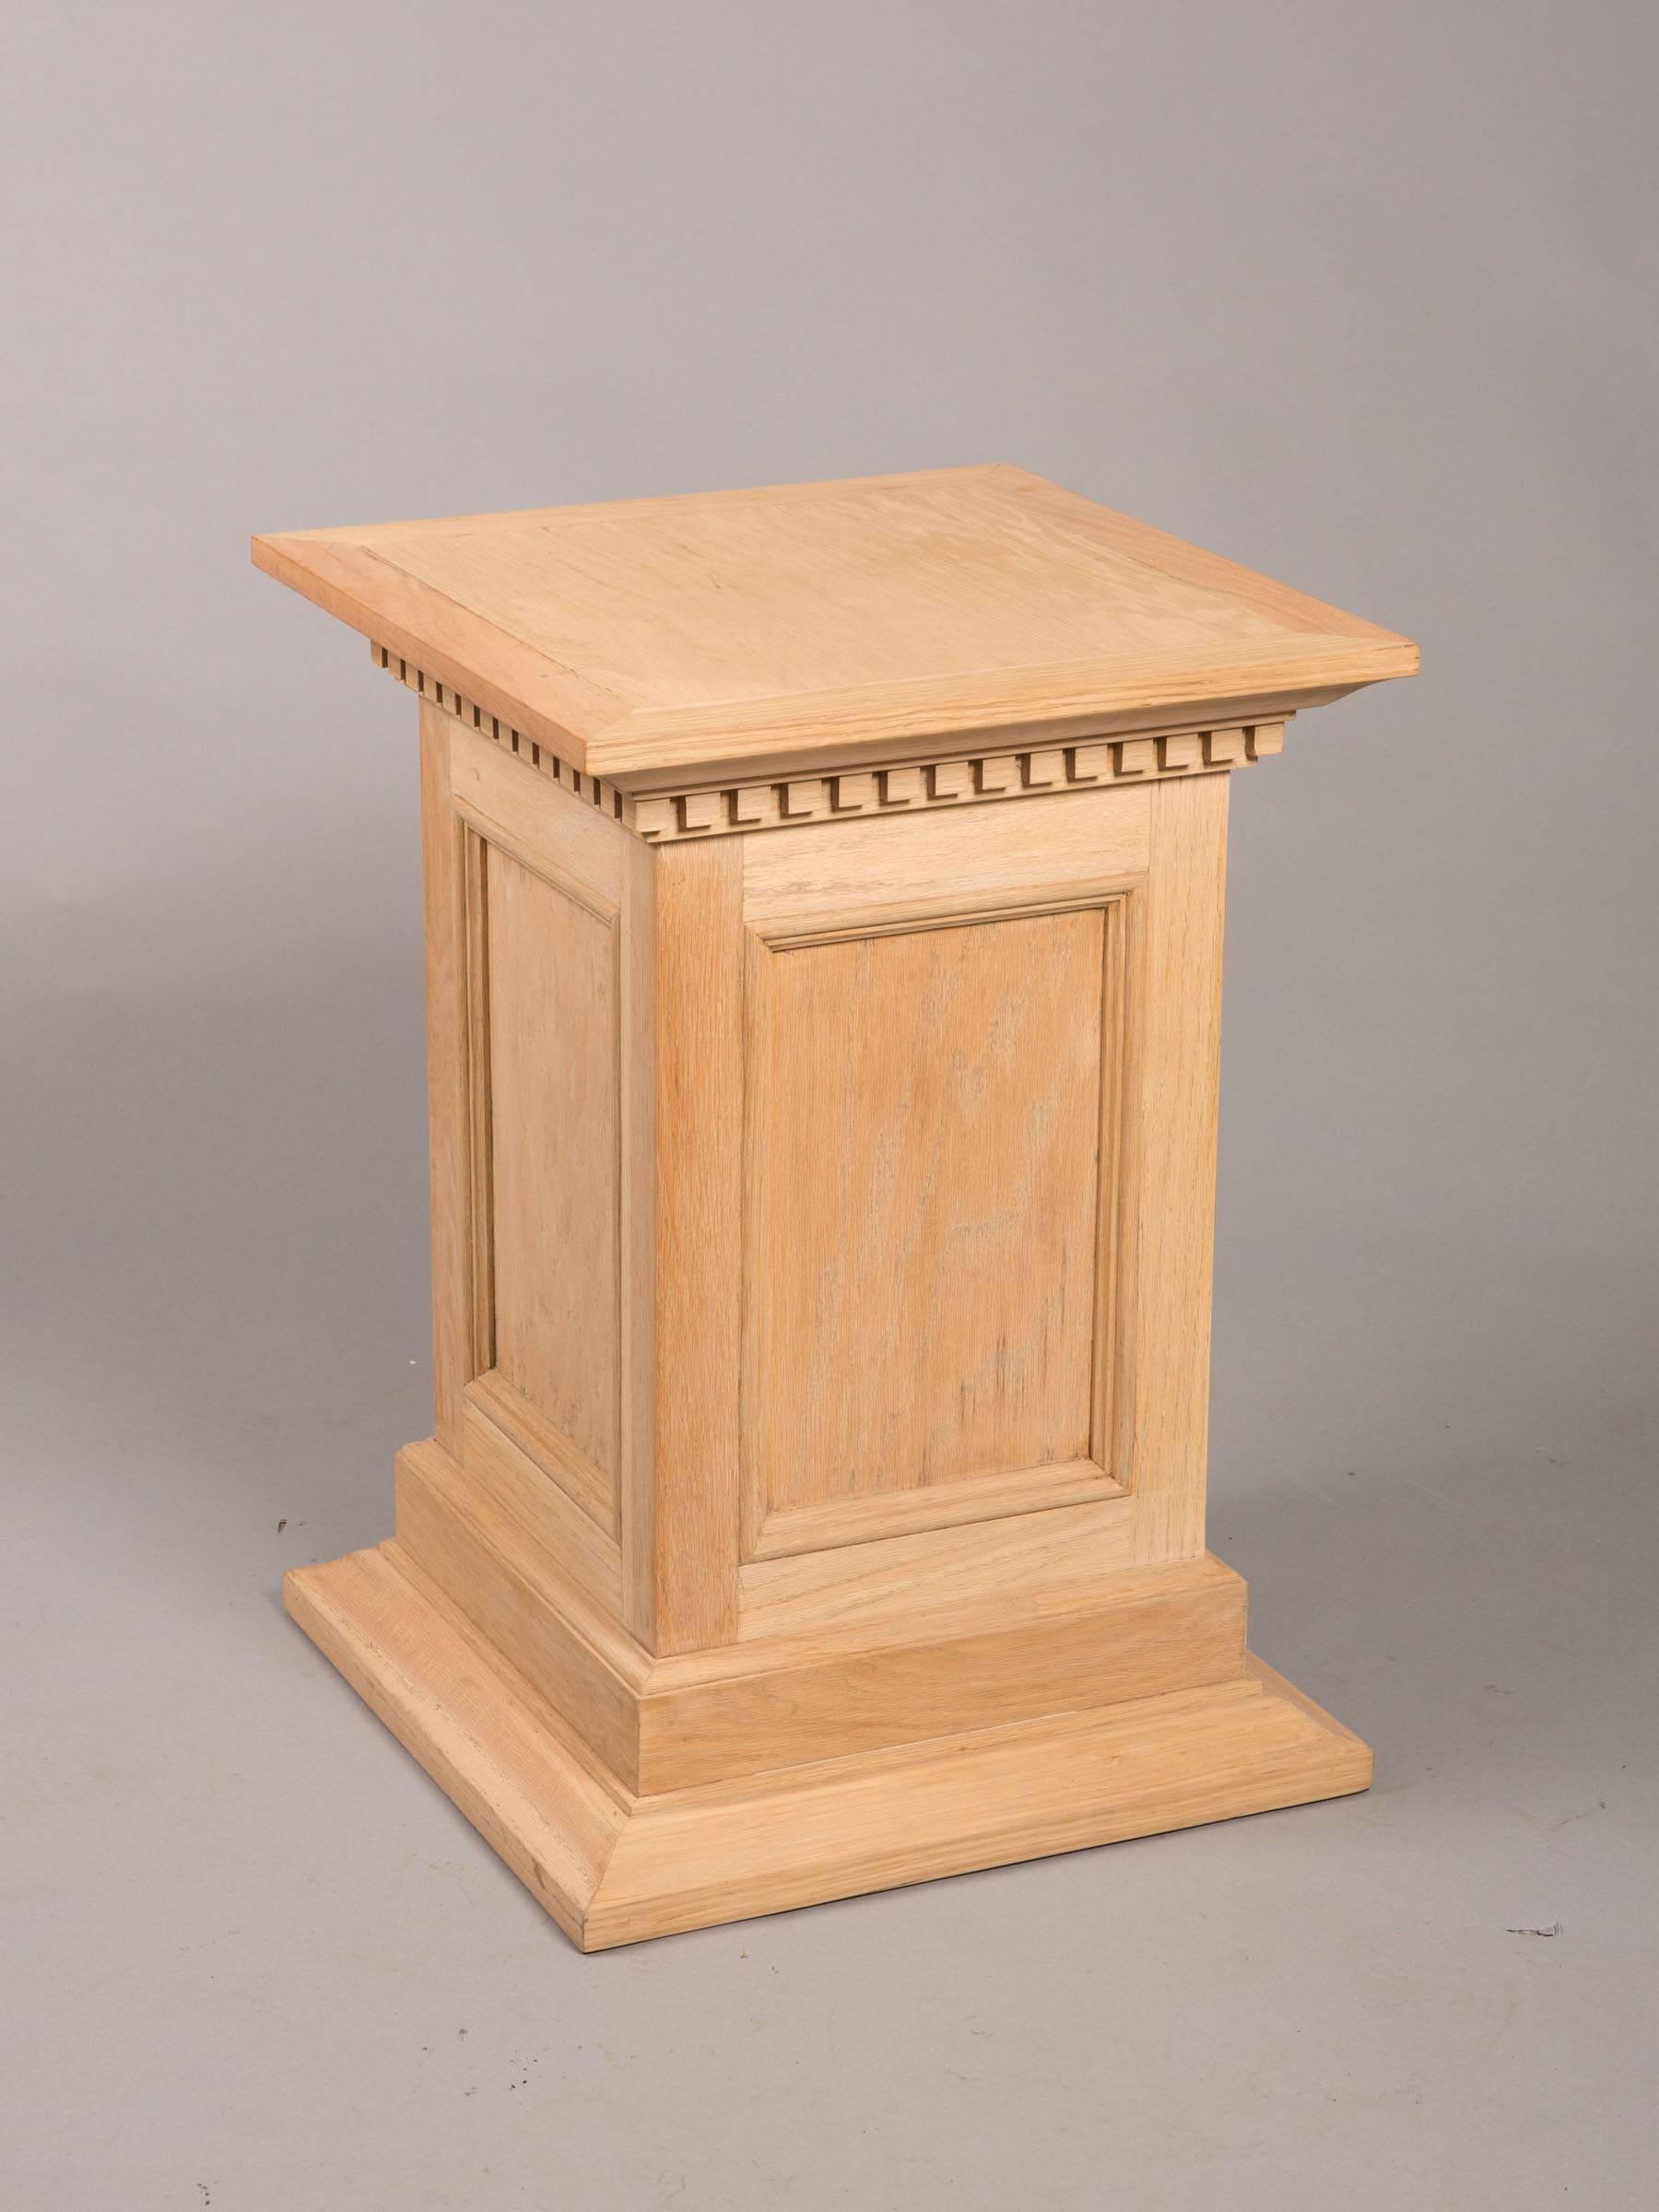 Pair of 1950s raw oak column pedestals with dentil molding and recessed panels.